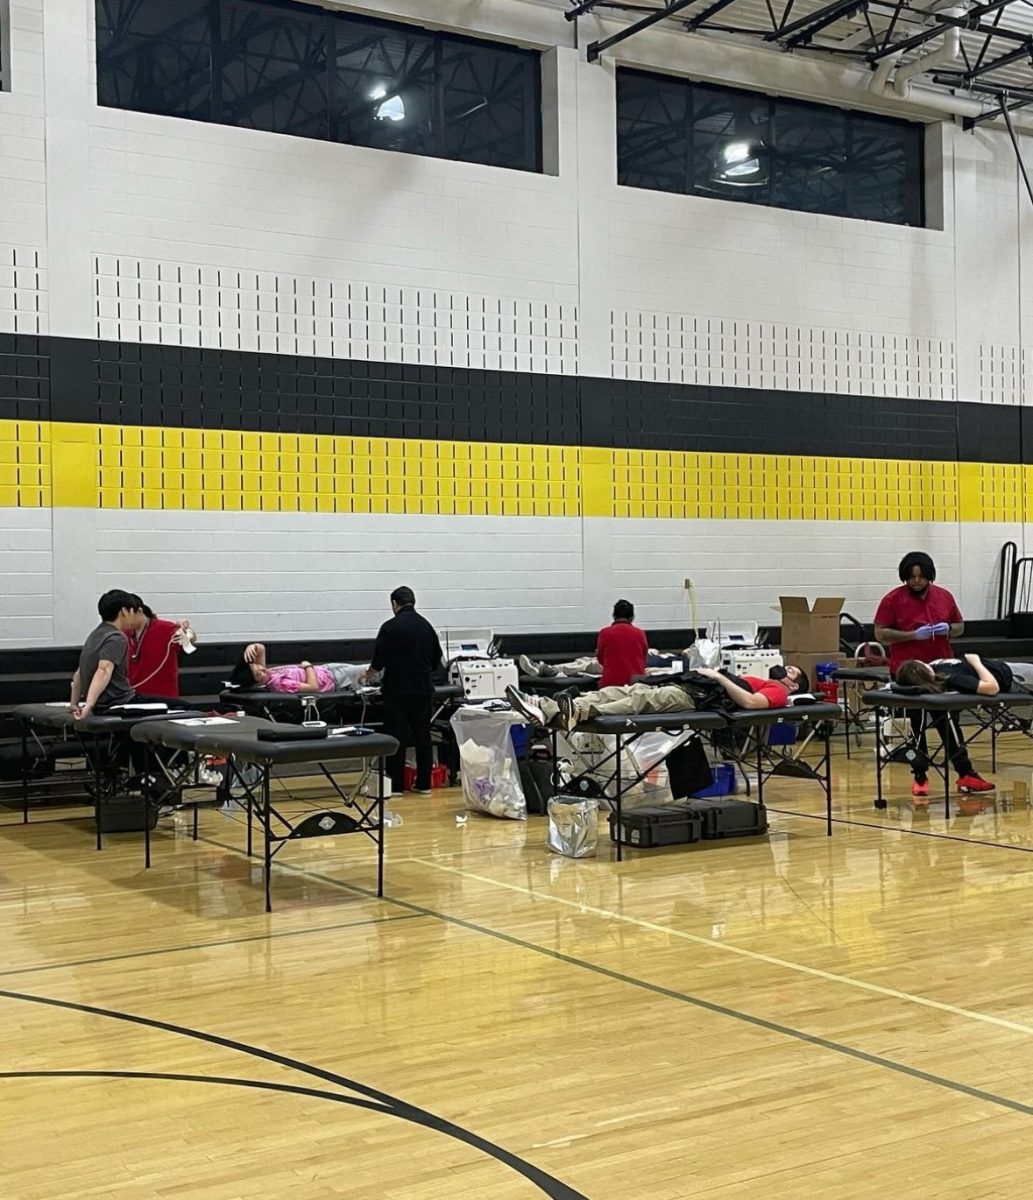 The lower gym becomes a blood bank thanks to the RD Red Cross Club.